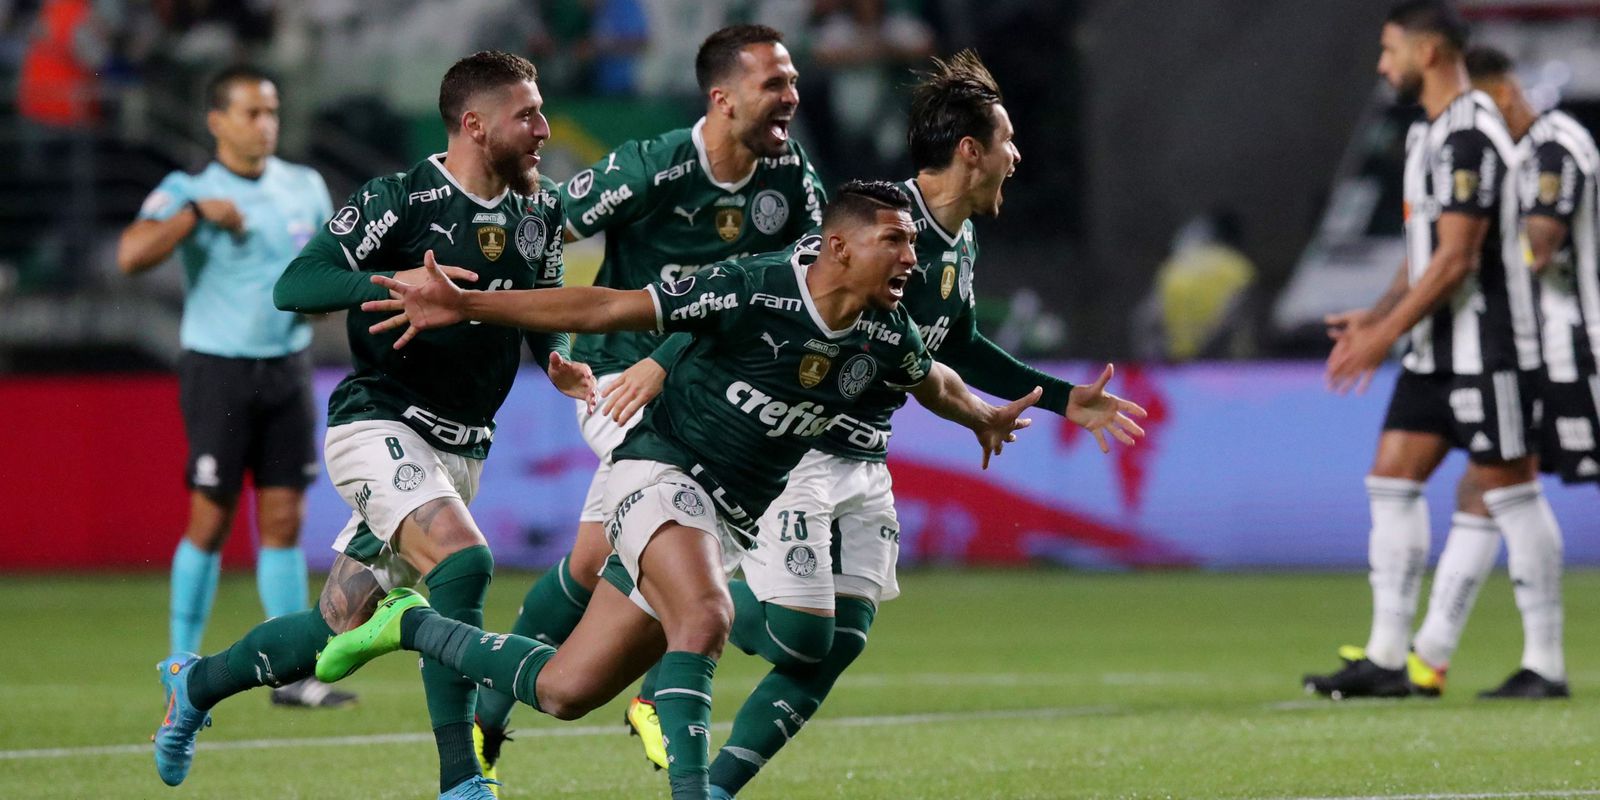 With two less, Palmeiras holds a tie and qualifies on penalties